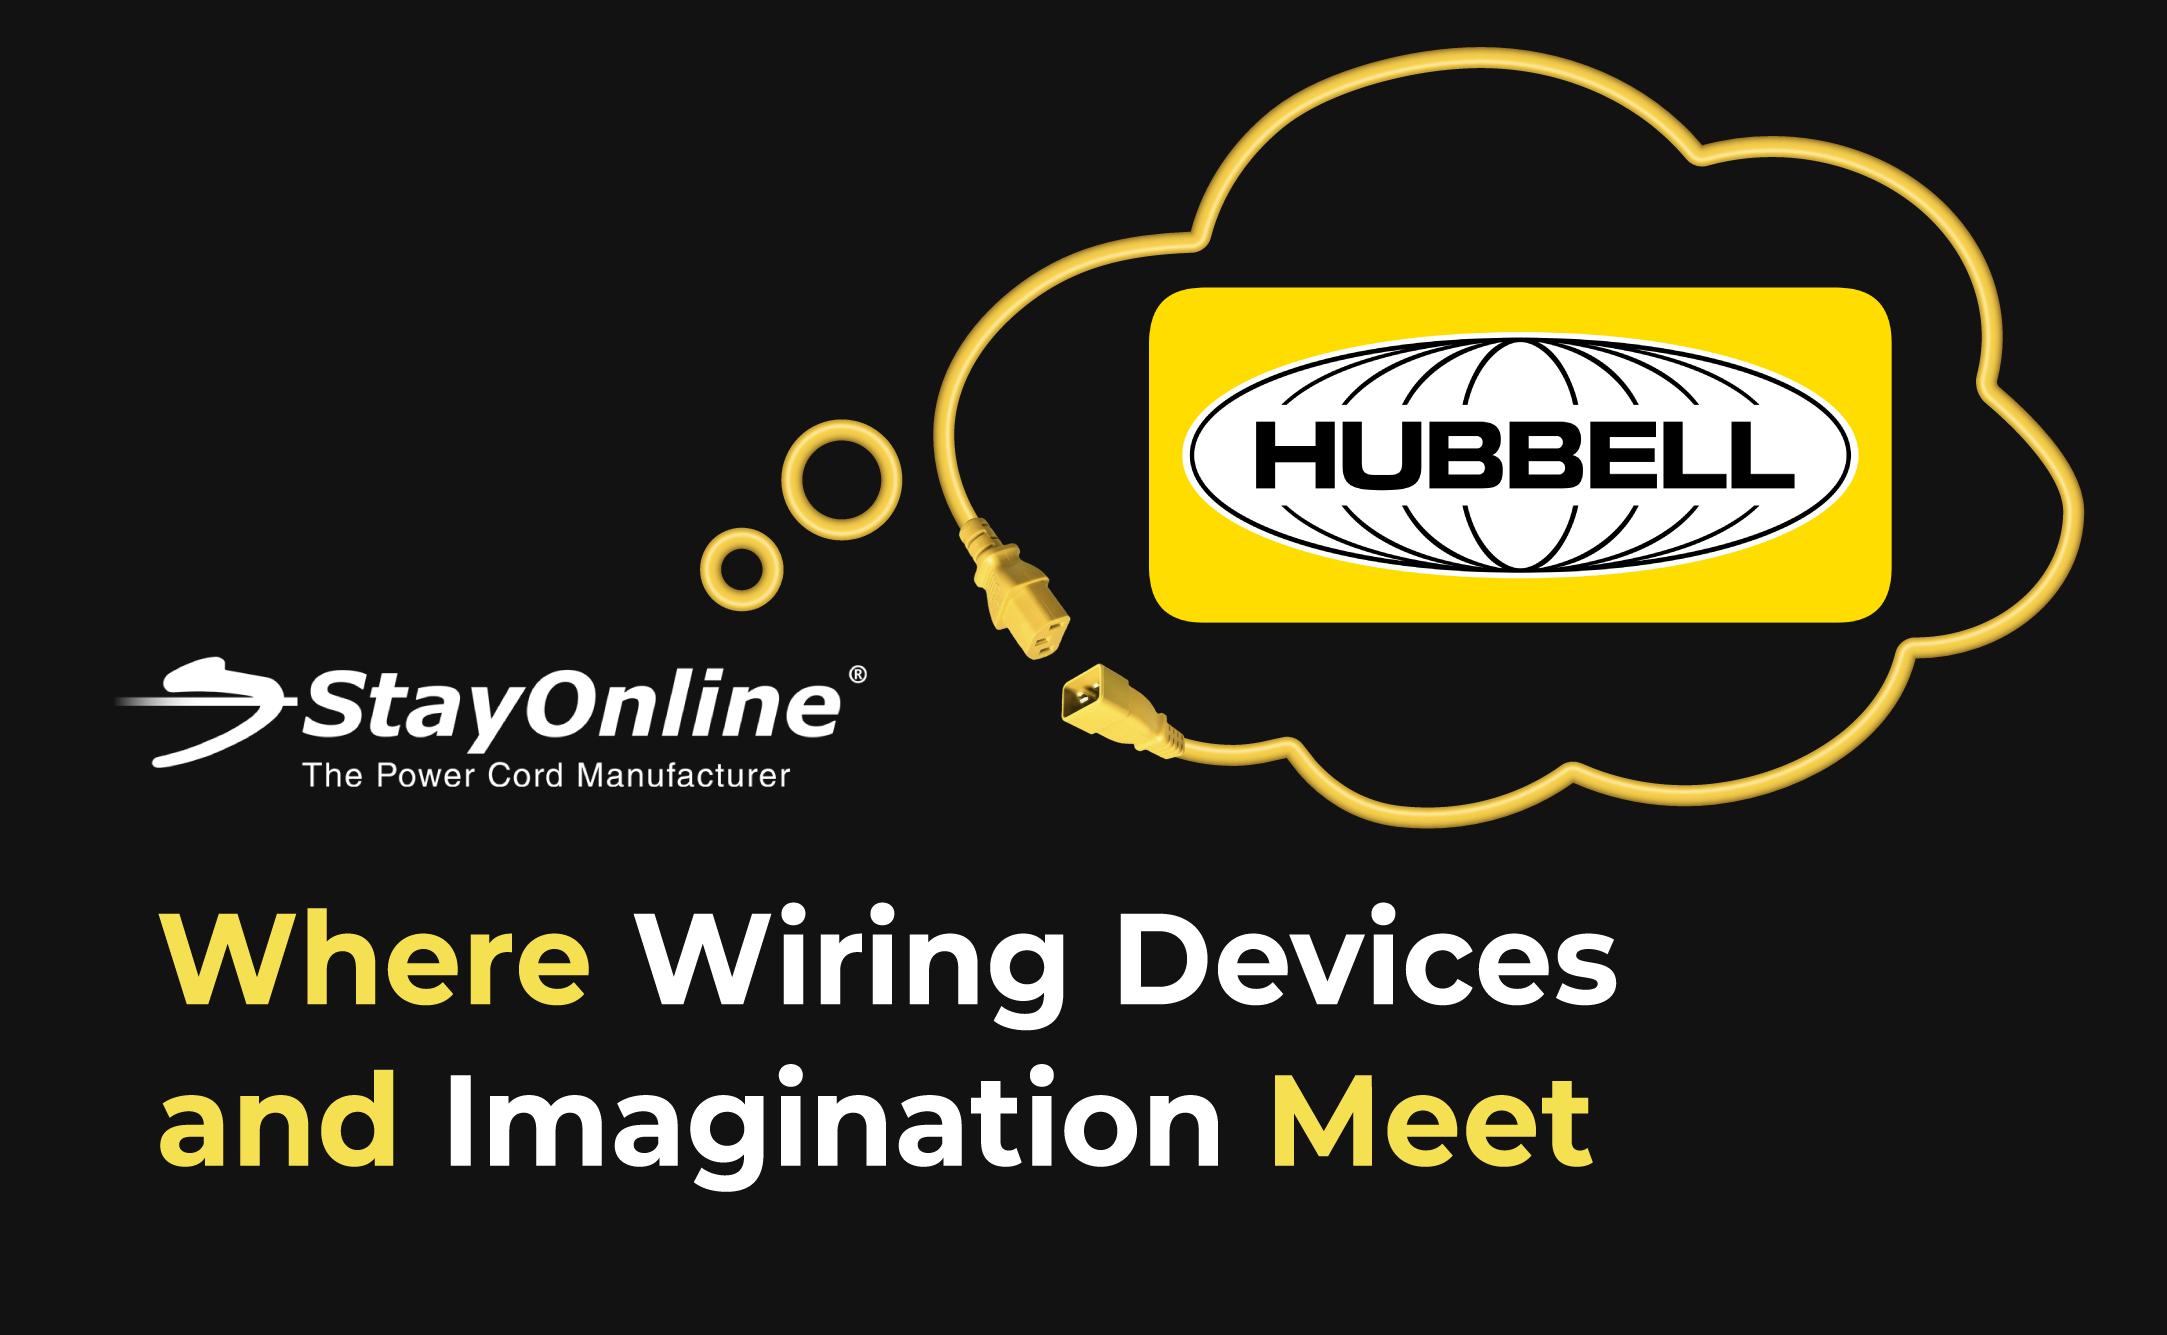 Hubbell Products